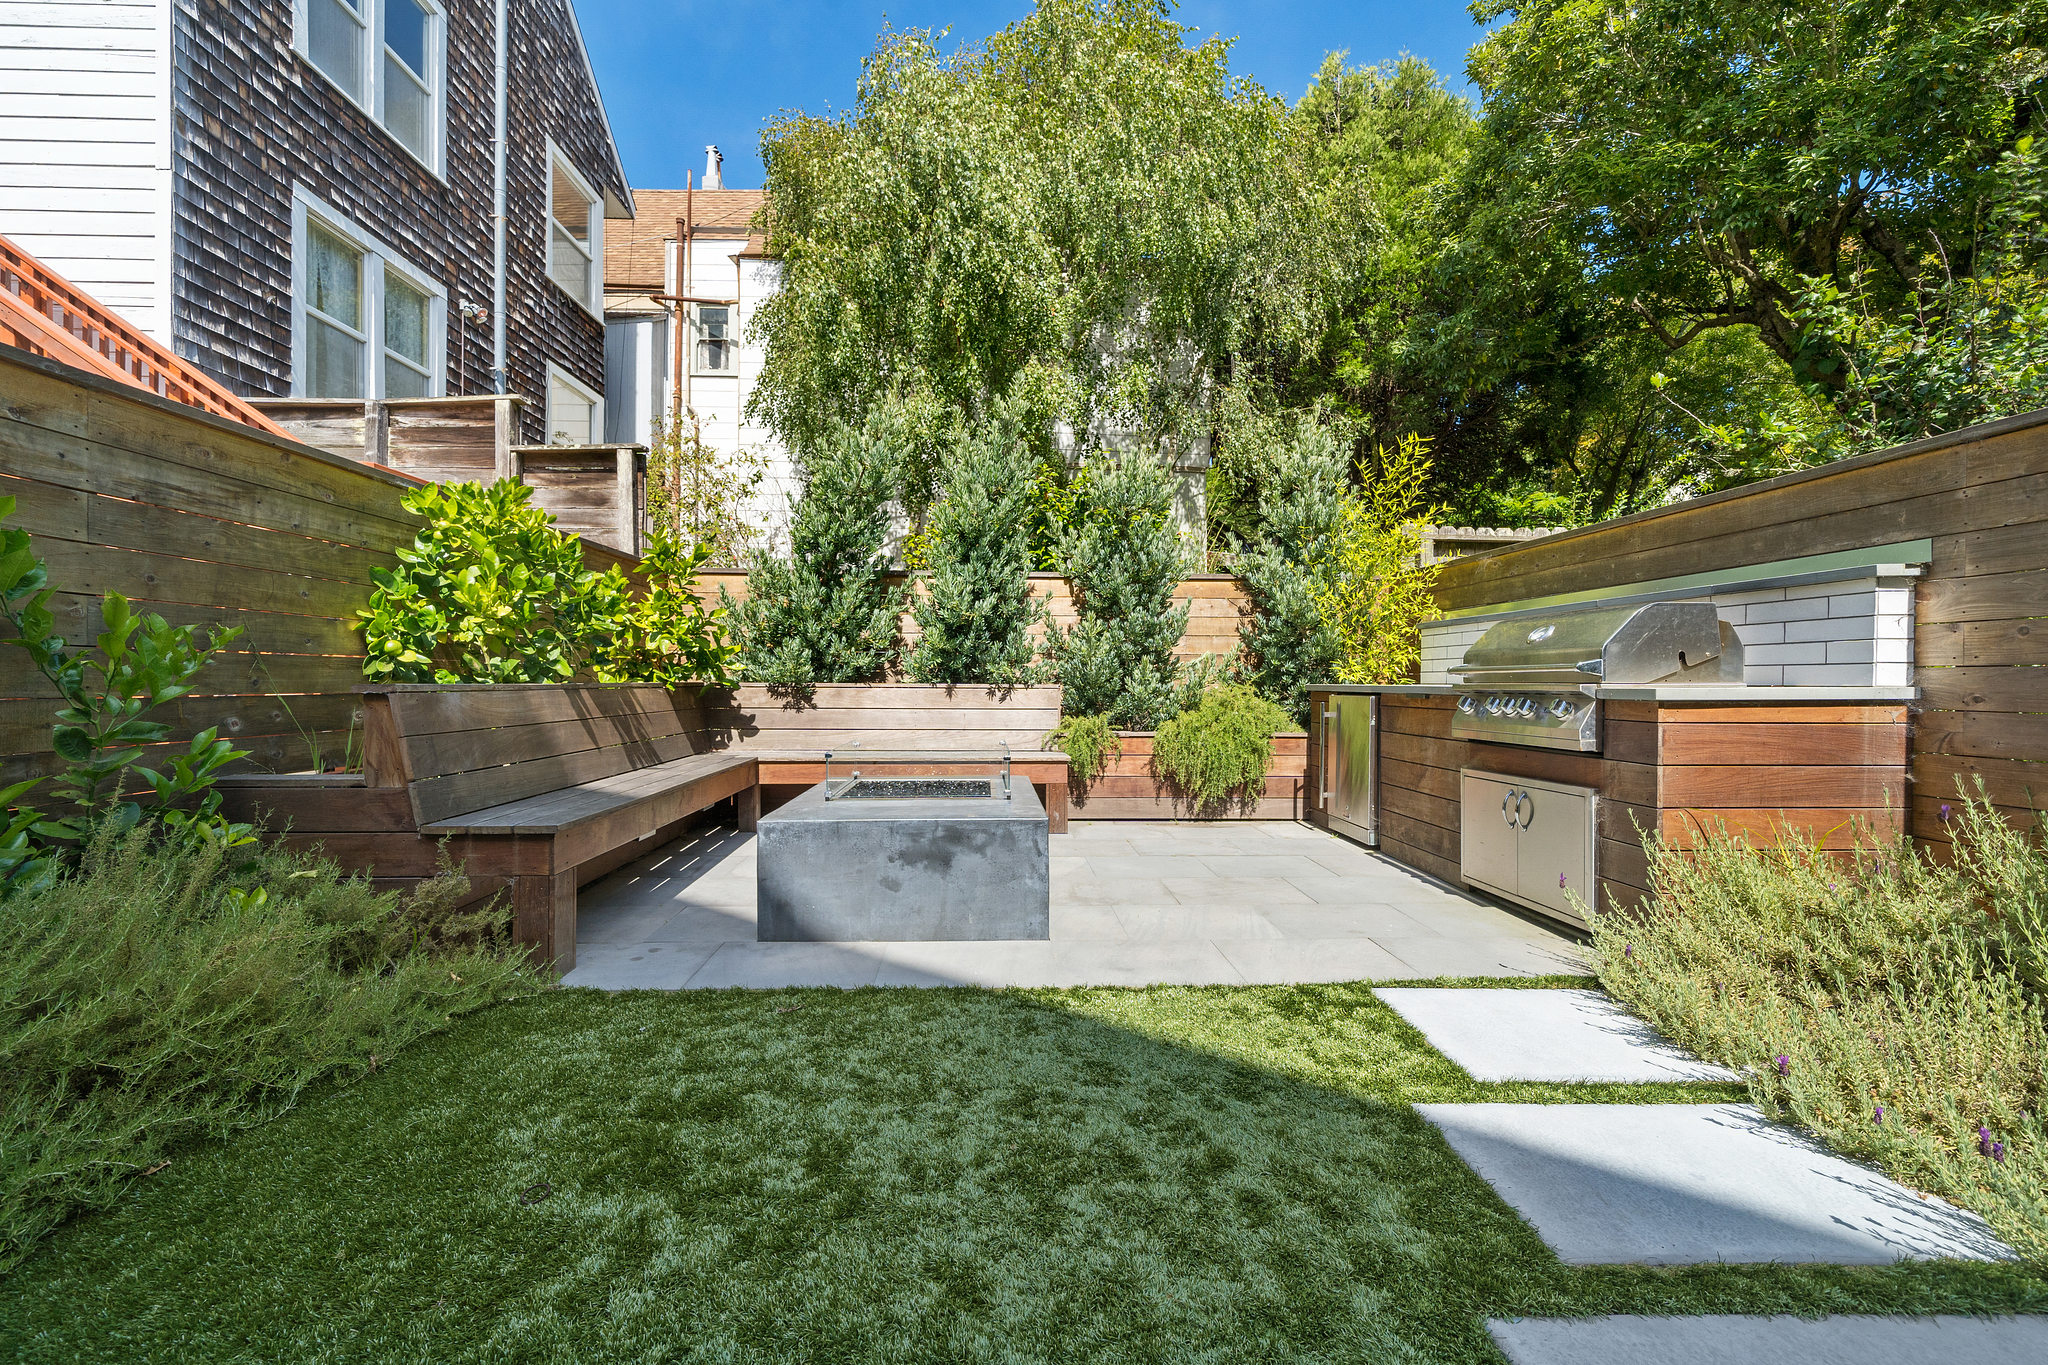 Property Photo: Yard an outdoor seating area